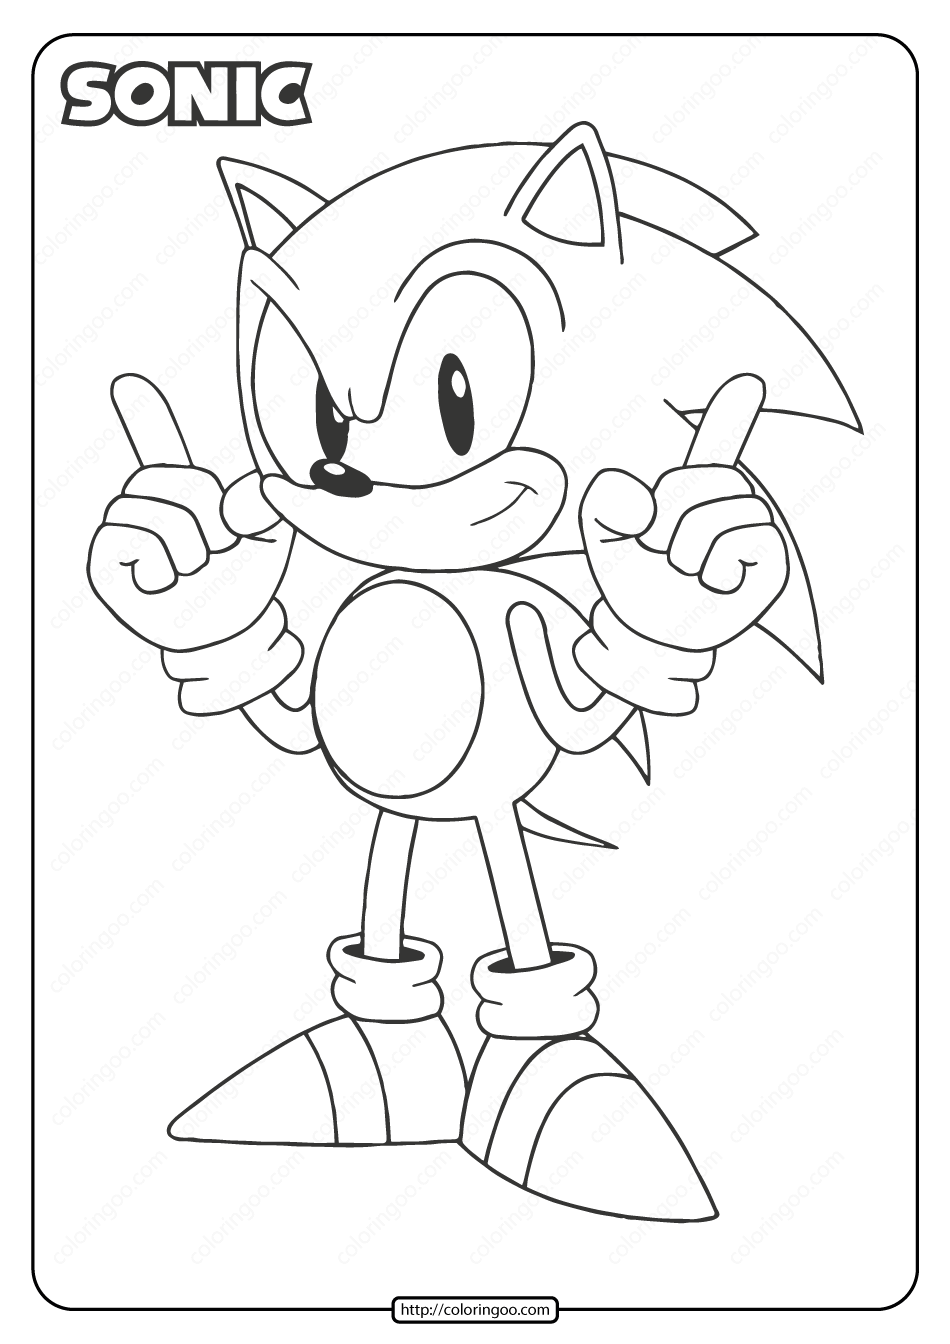 printable sonic pdf coloring pages